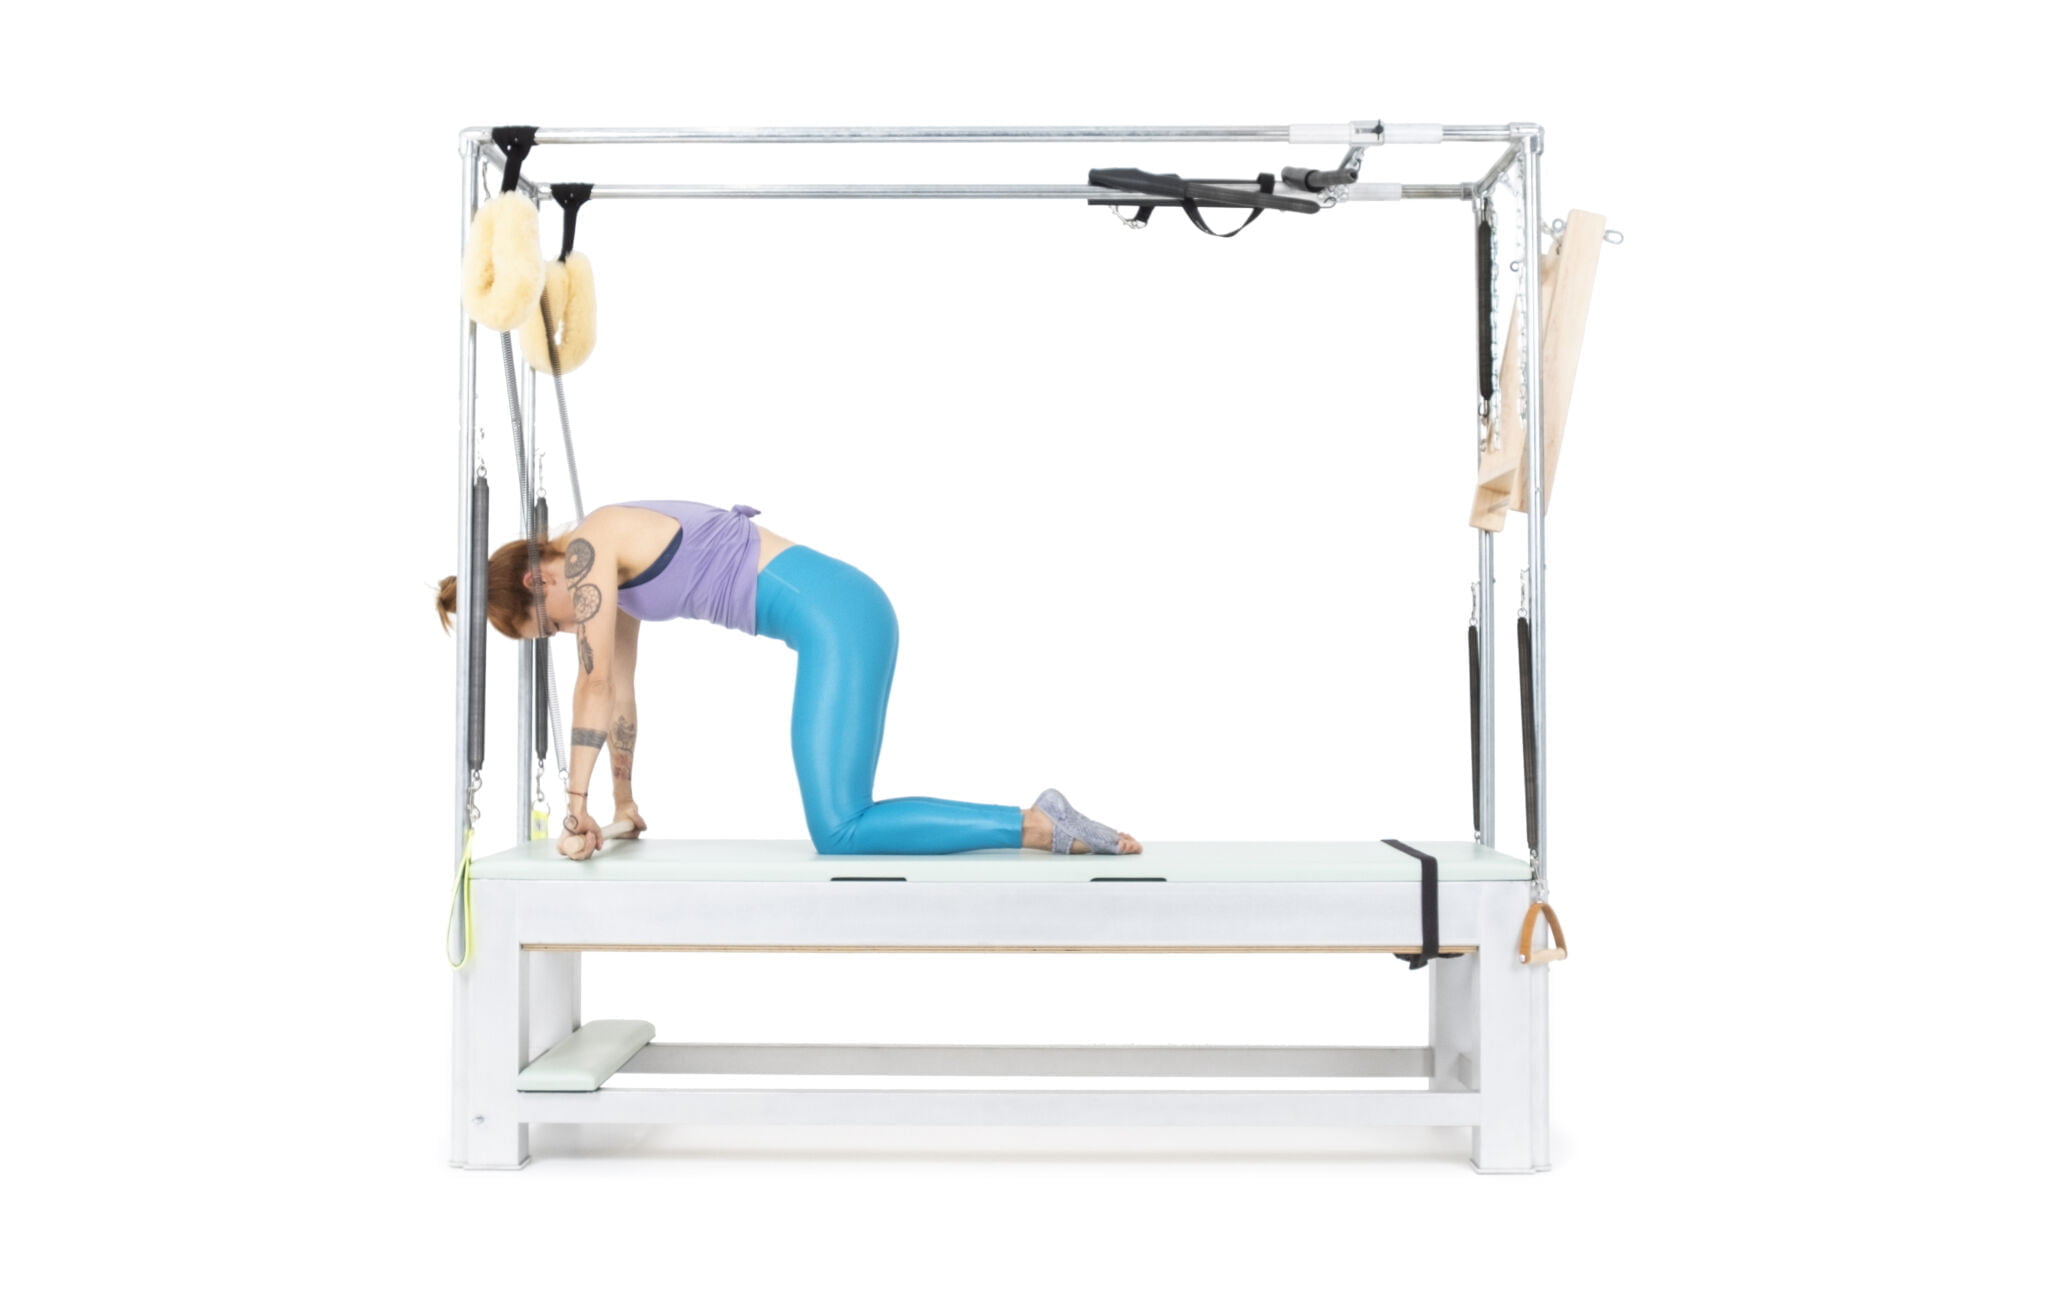 Rolling-In-and-Out-Prep-with-Roll-Back-Bar-on-the-Cadillac-or-Tower-Online-Pilates-Classes-scaled